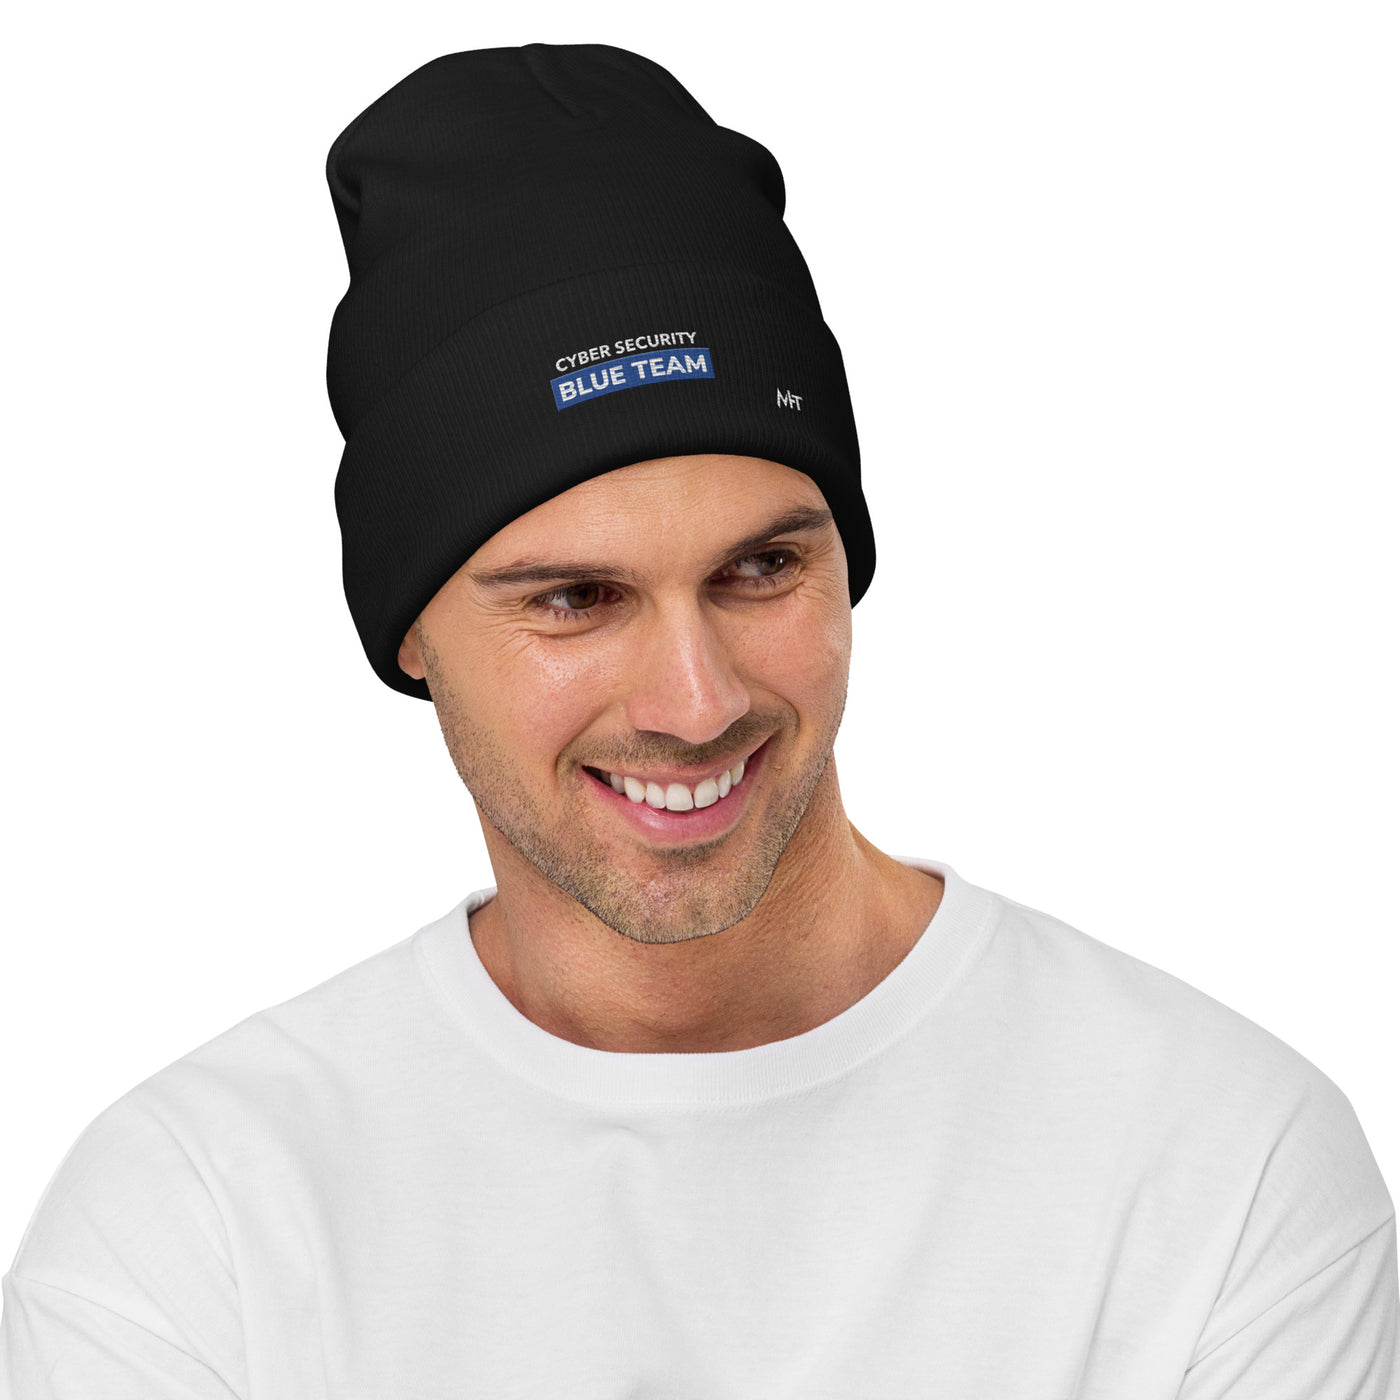 Cyber Security Blue Team V11 - Embroidered Beanie